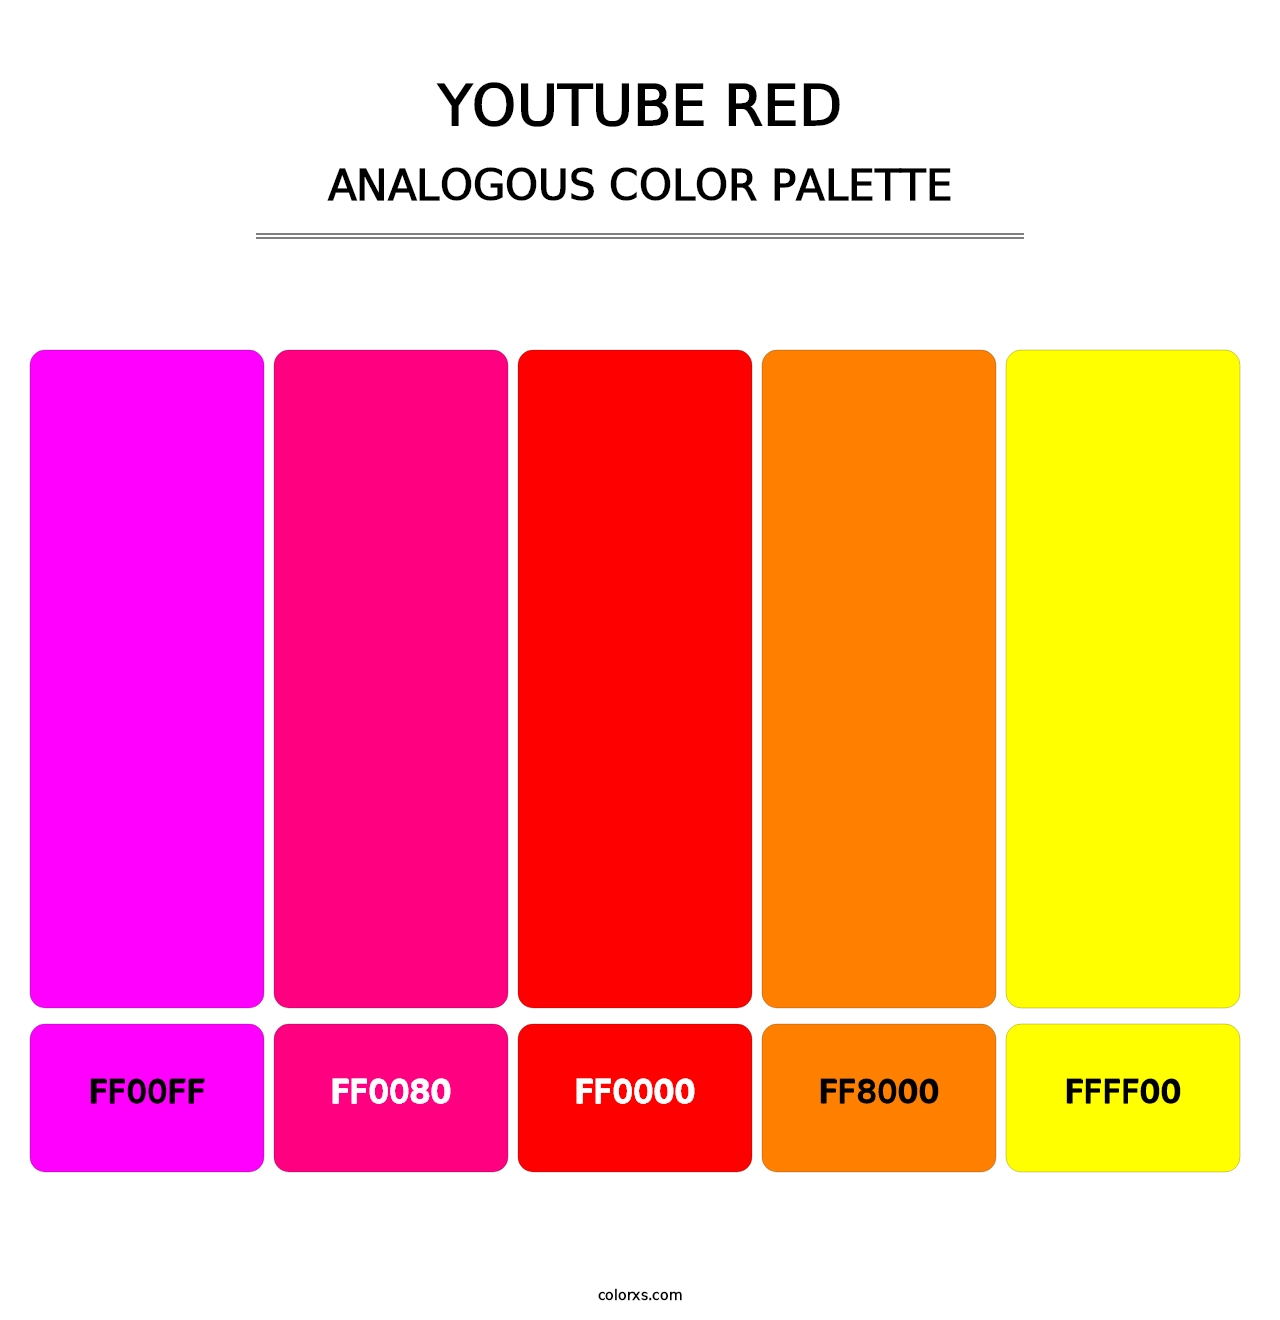 YouTube Red - Analogous Color Palette